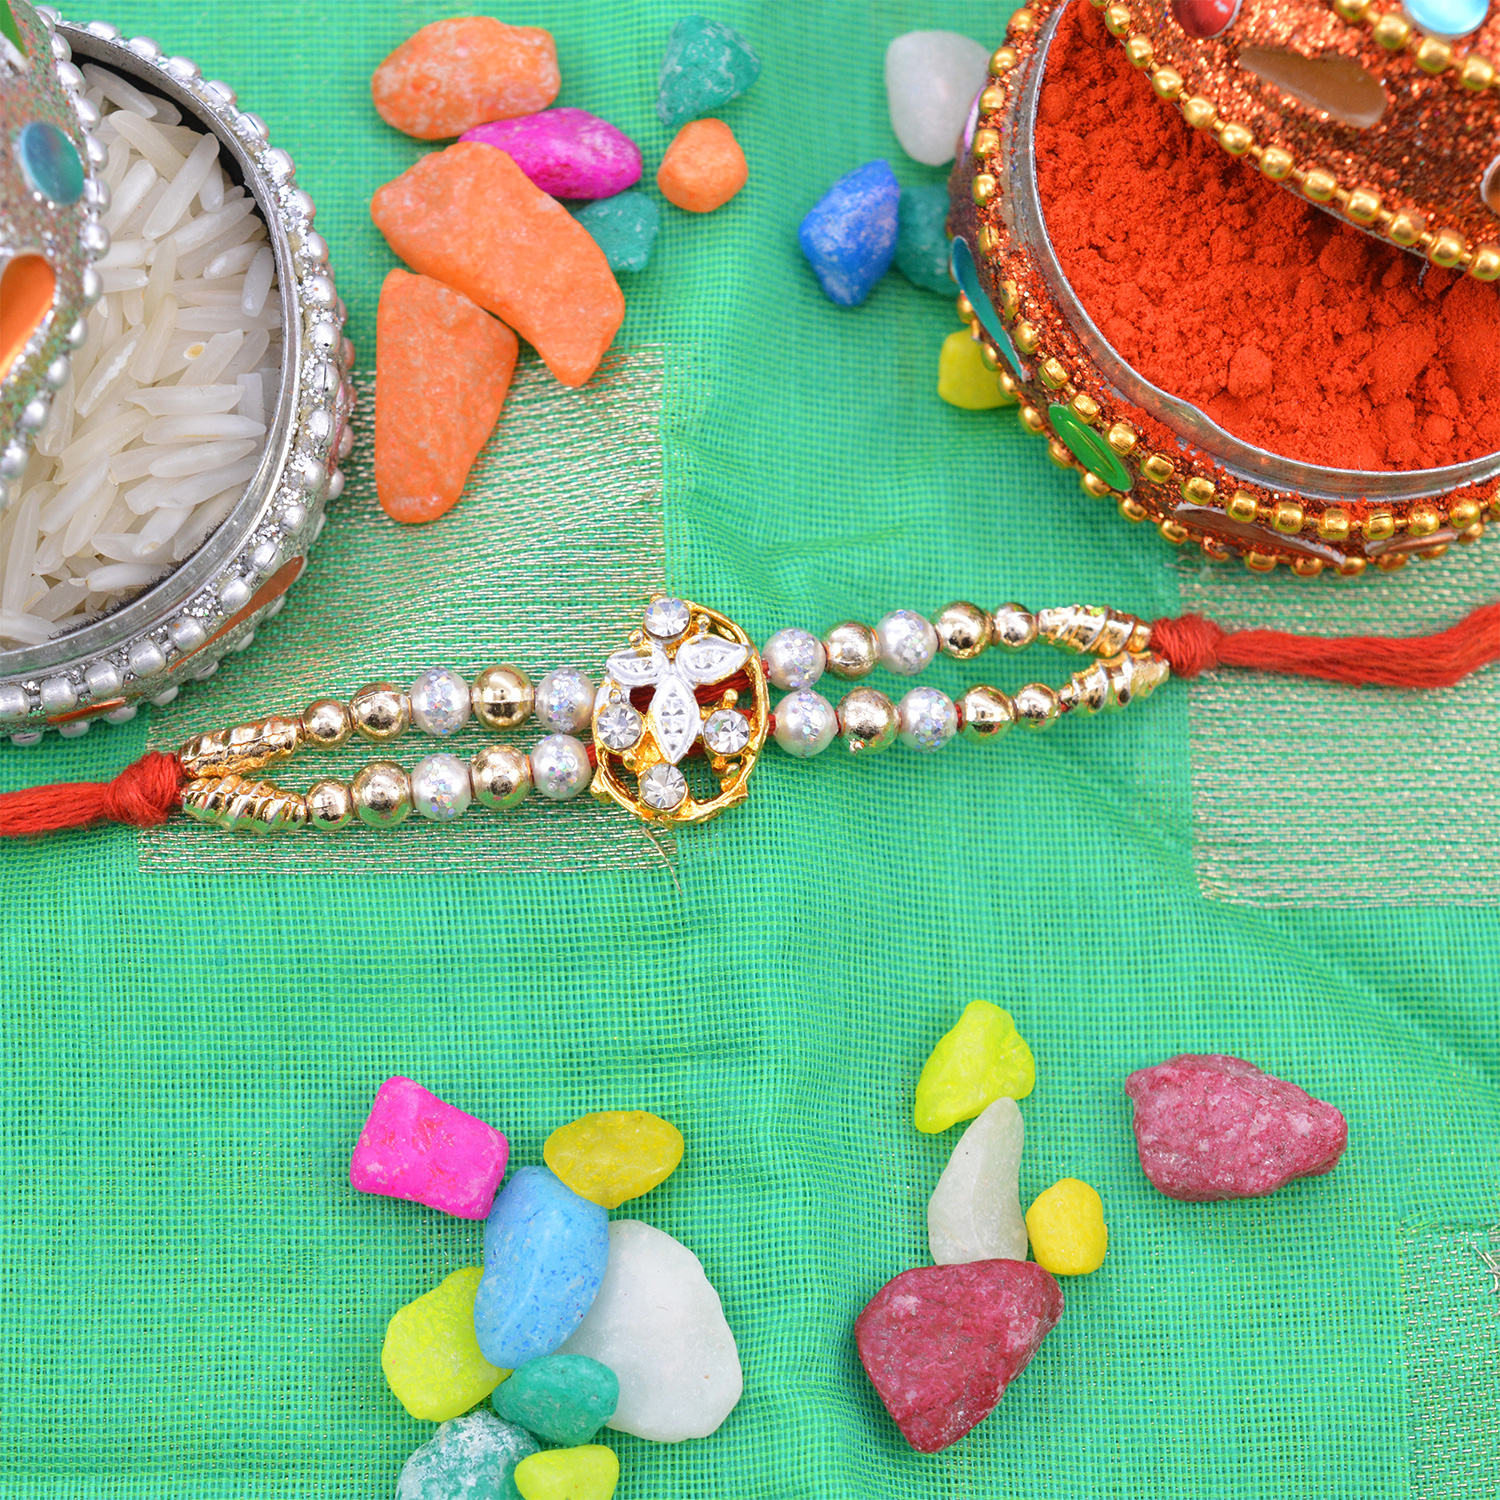 Silver and Golden Color leaves in Middle Beads Rakhi